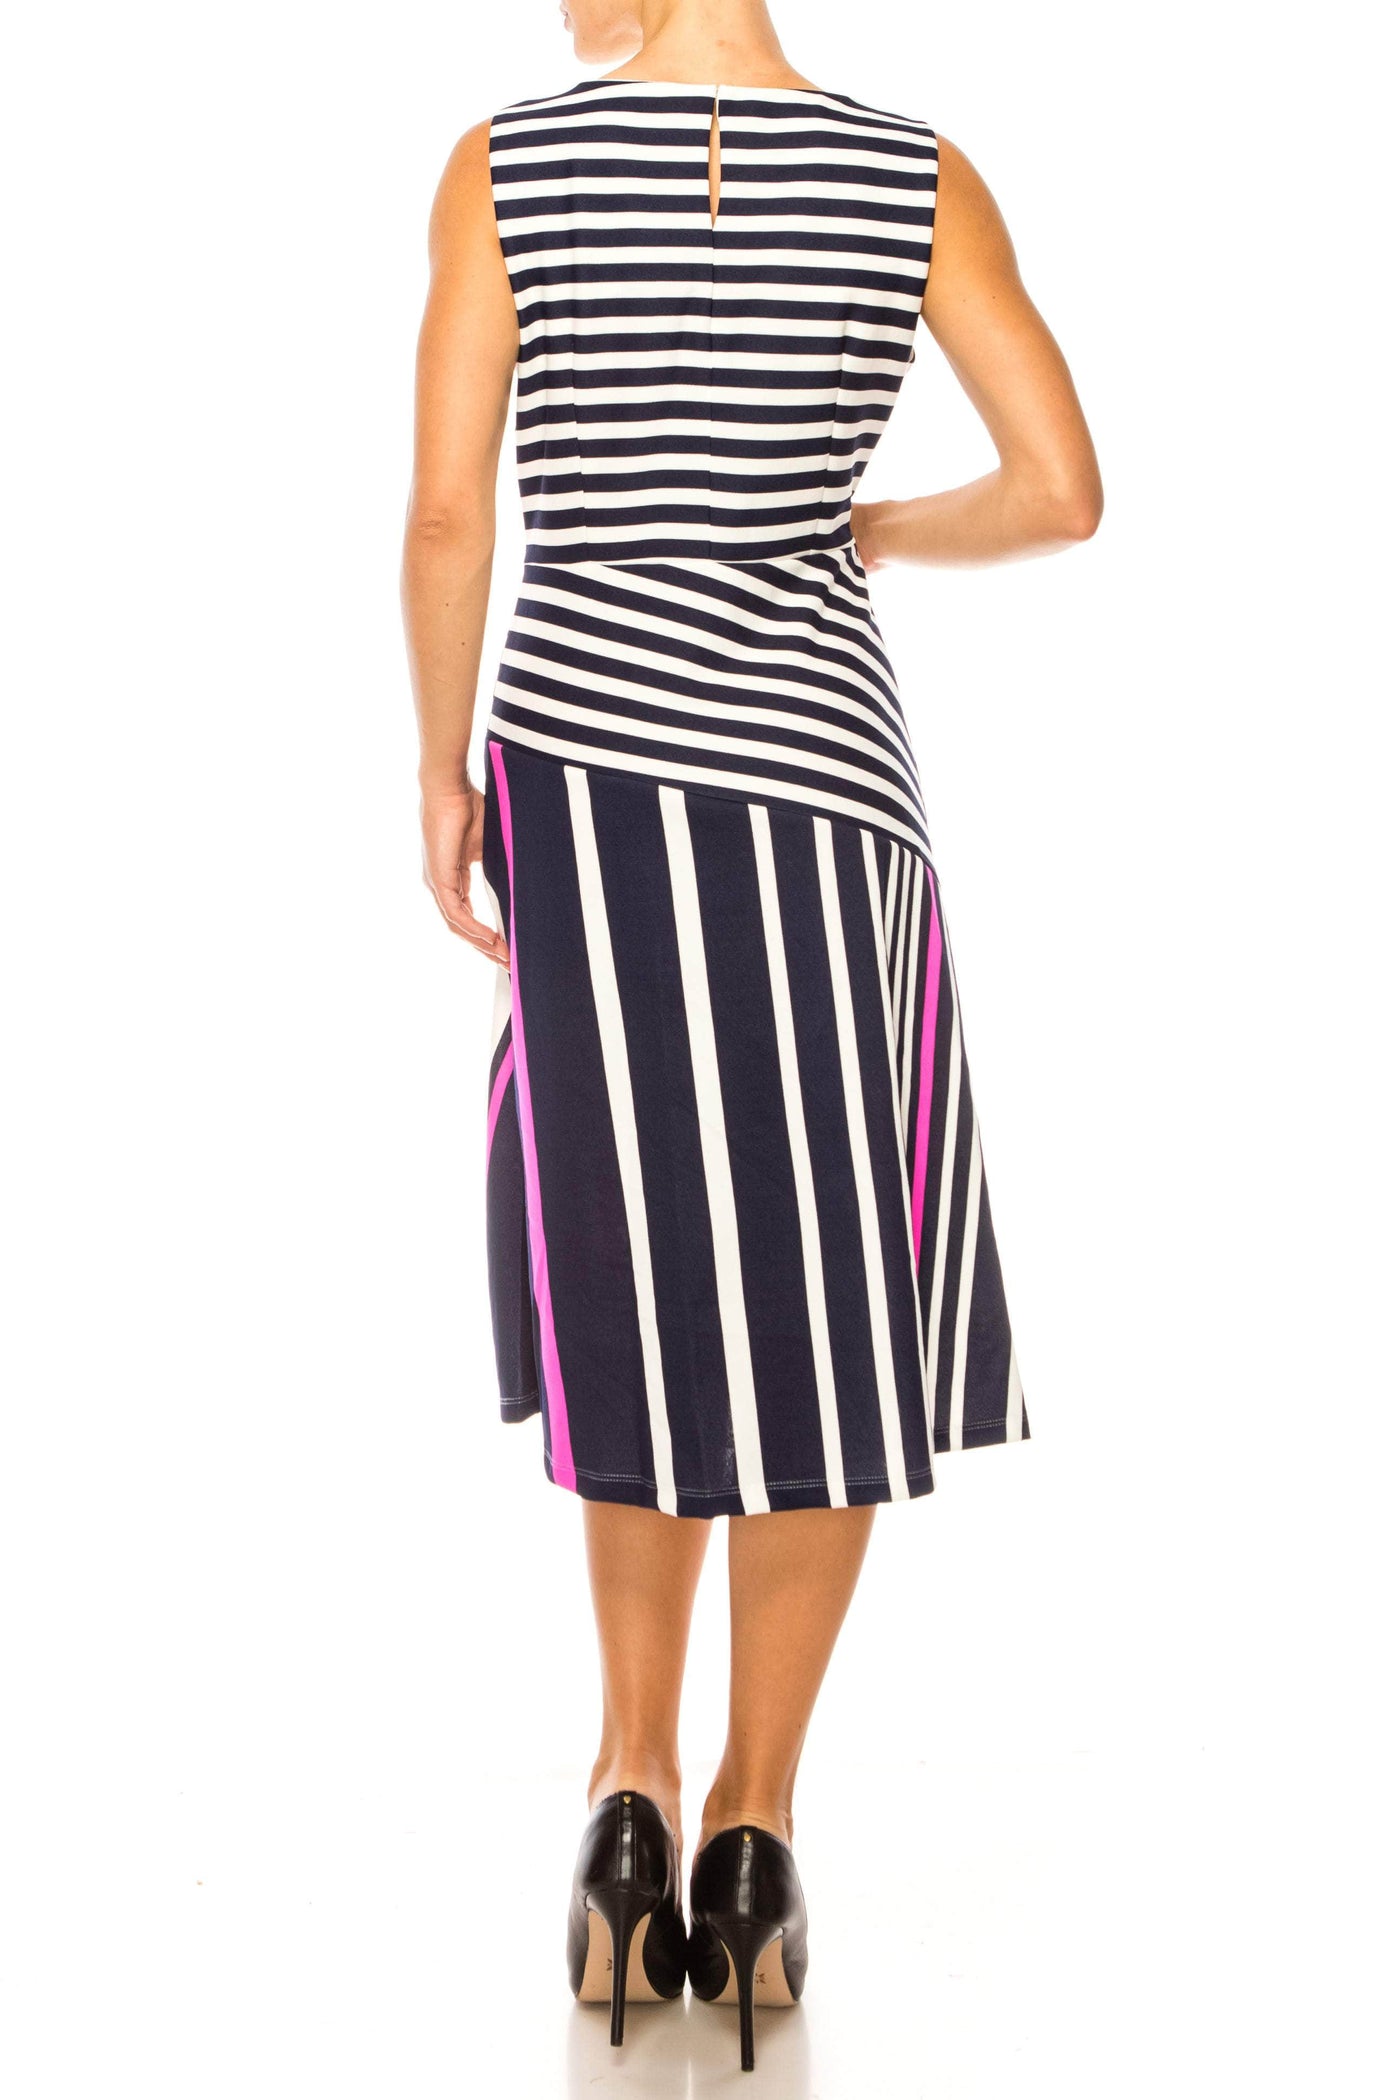 ILE Clothing SCP1326 - Sleeveless Striped Dress Special Occasion Dresses